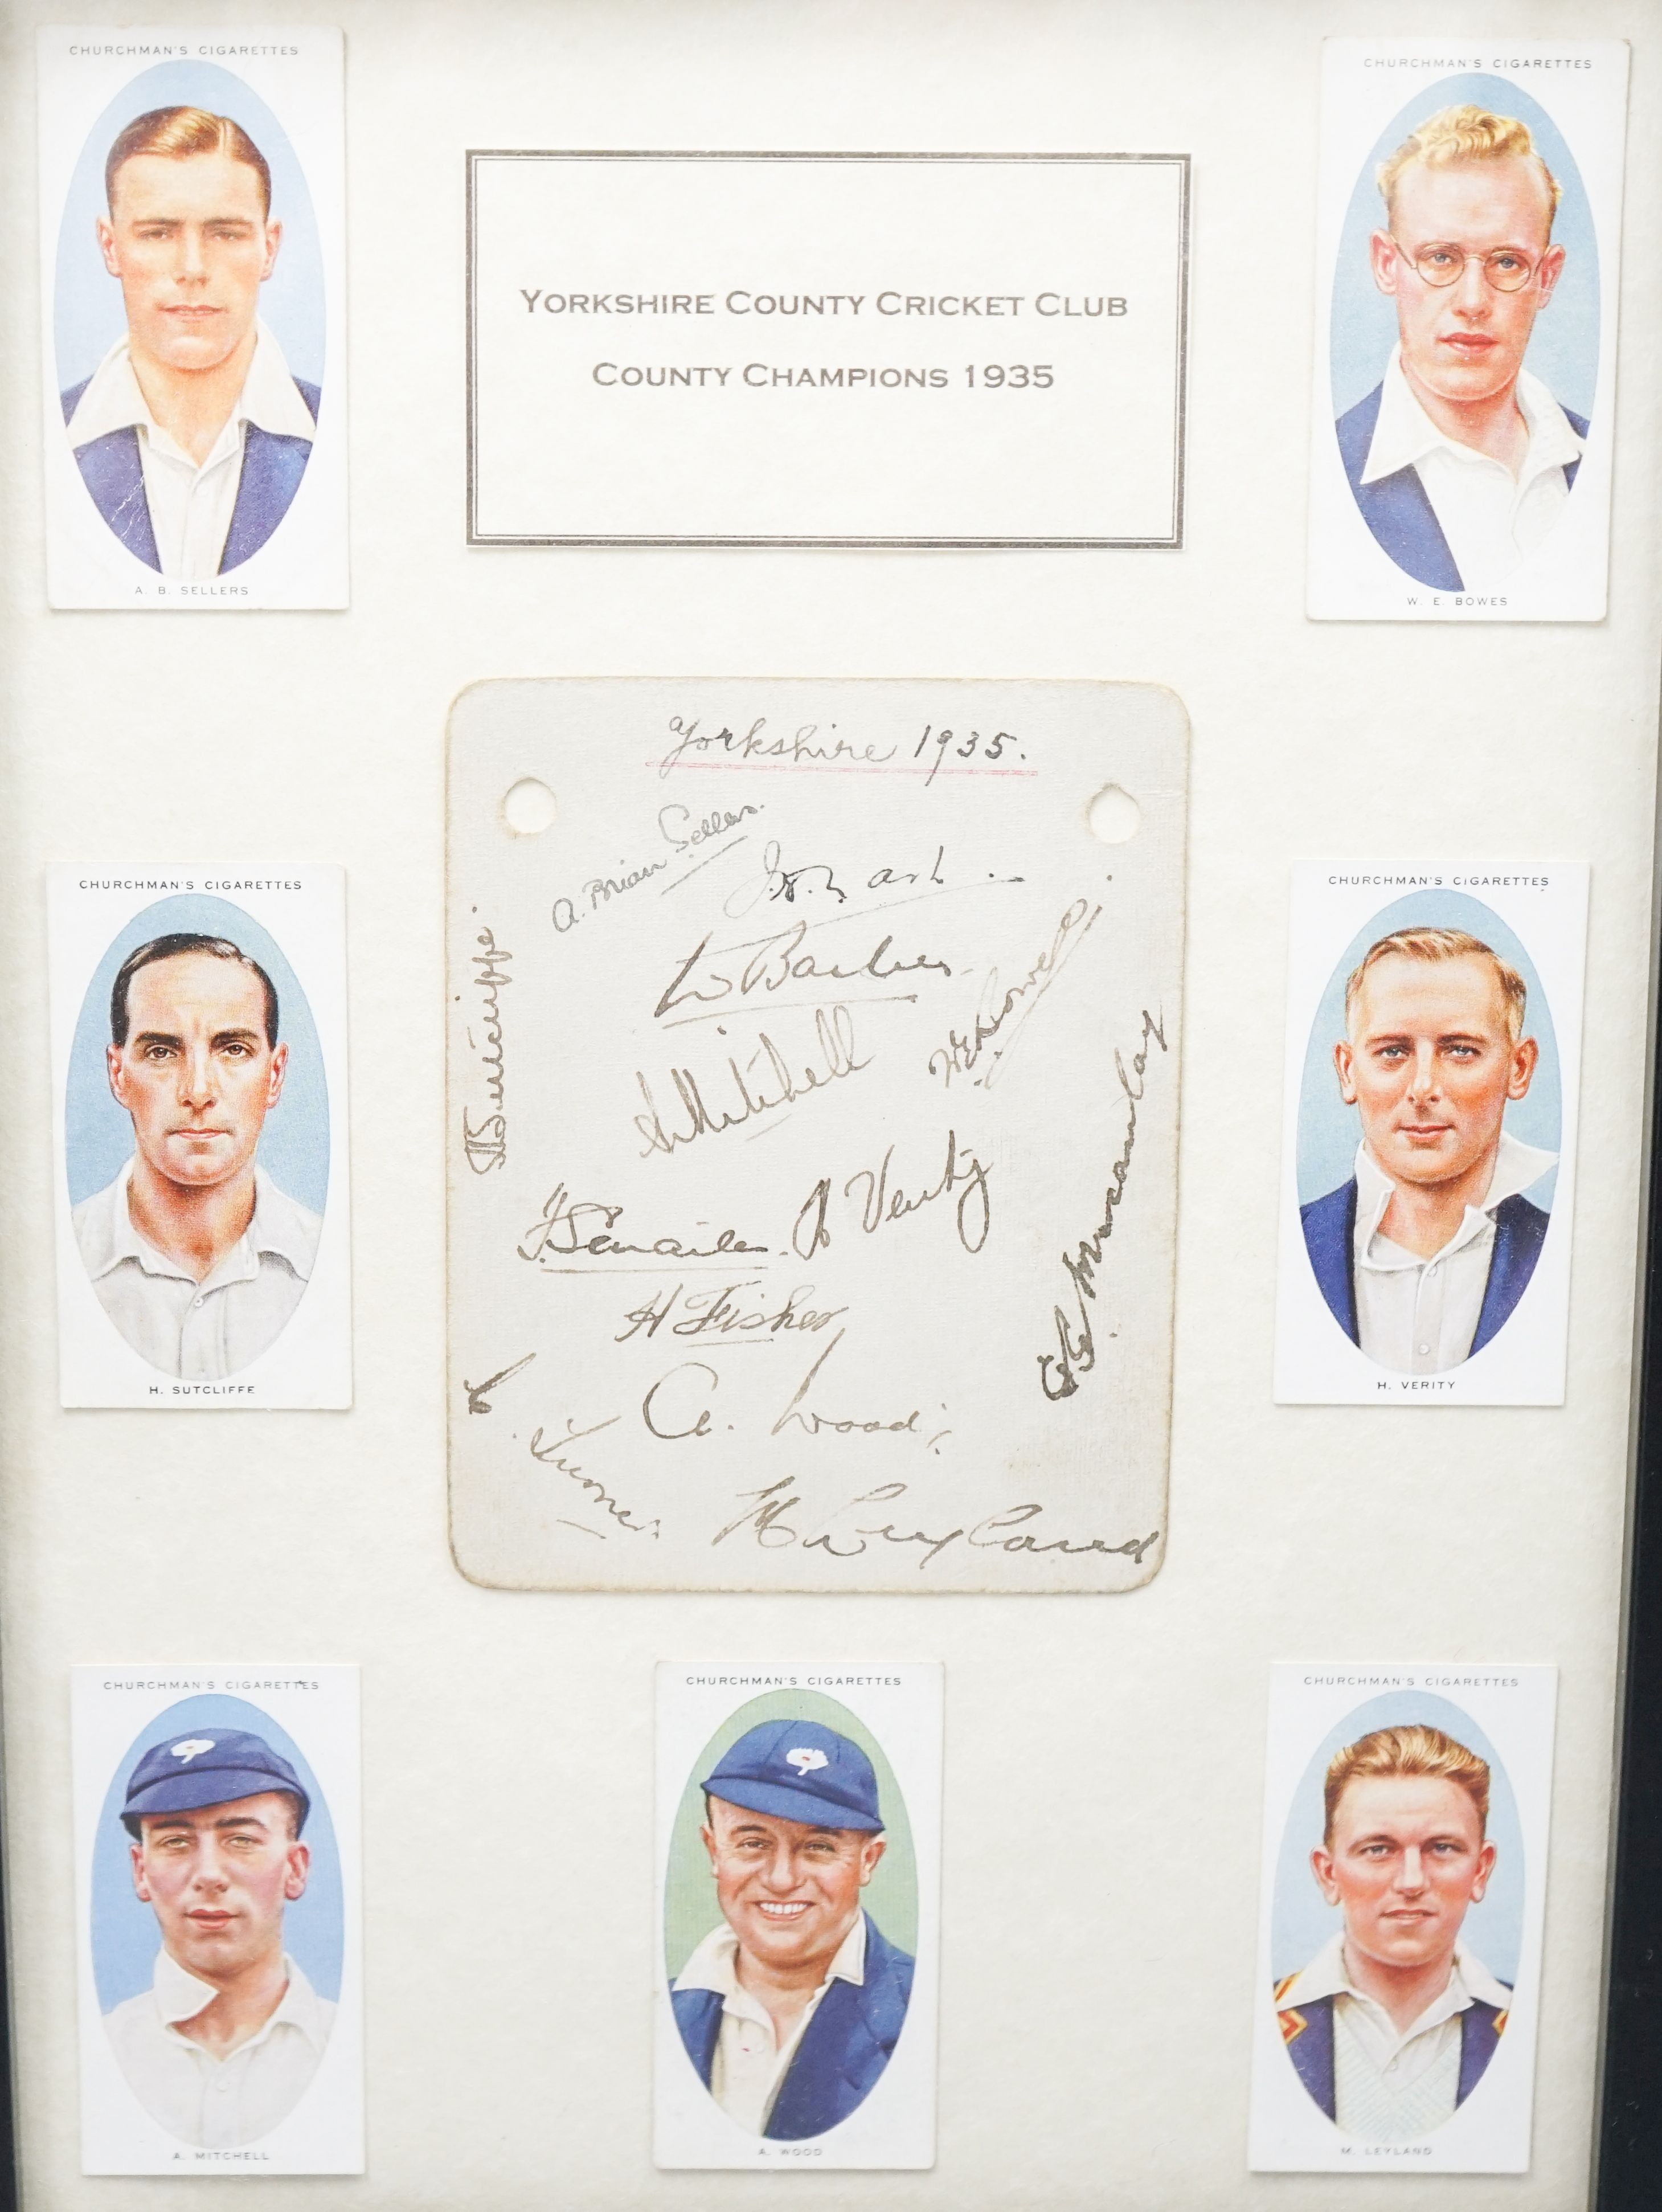 Yorkshire County Cricket team county champions 1935, set of players signatures on a card and cigarette card portraits